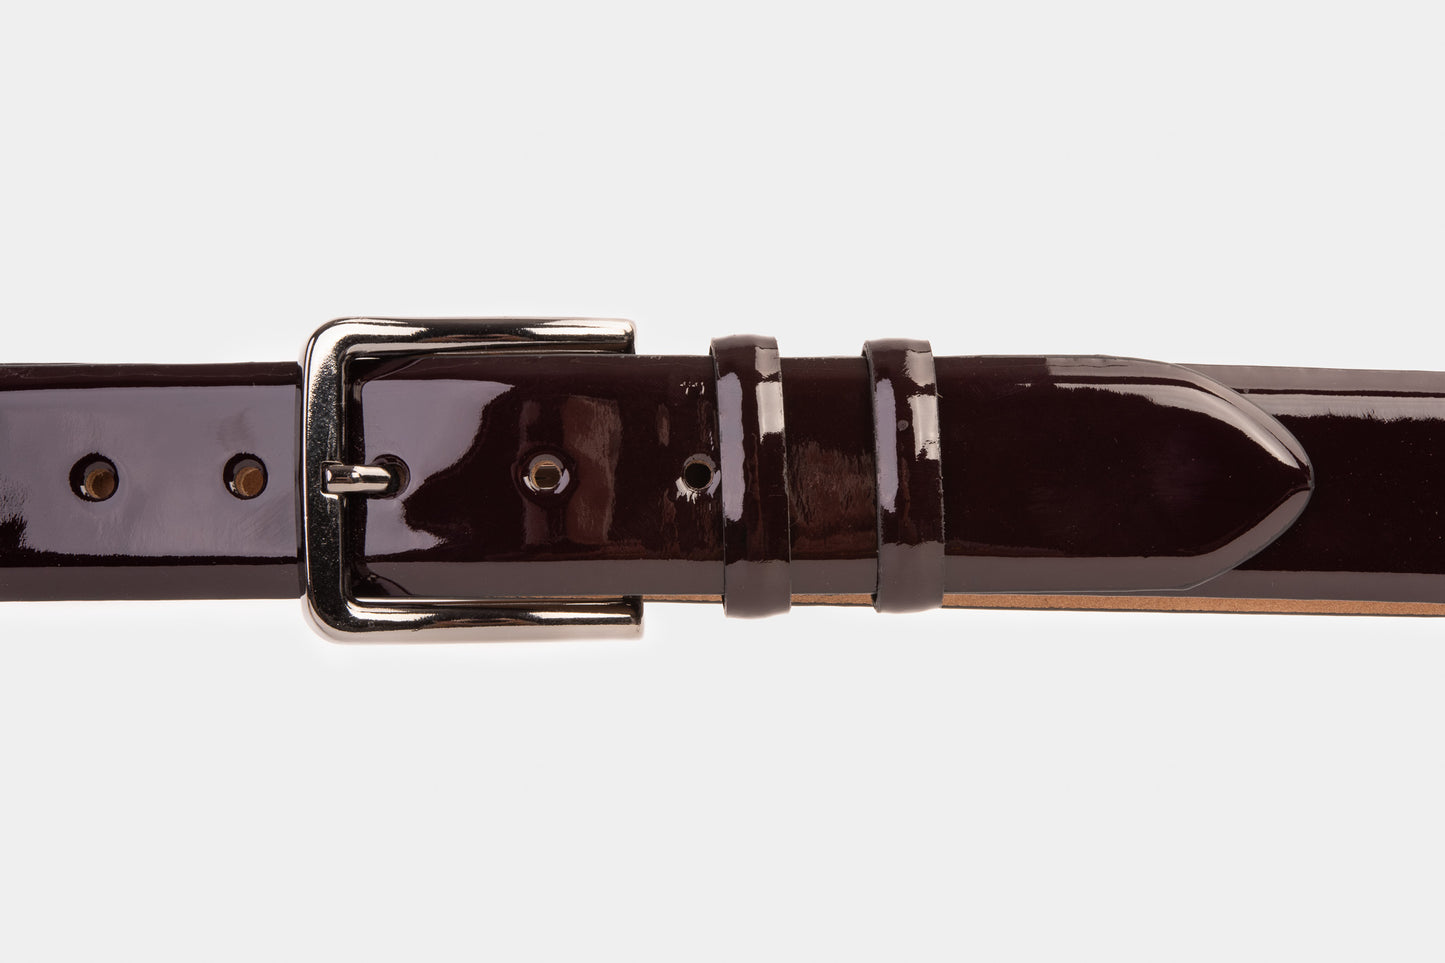 The Dodoma Burgundy Patent Leather Belt